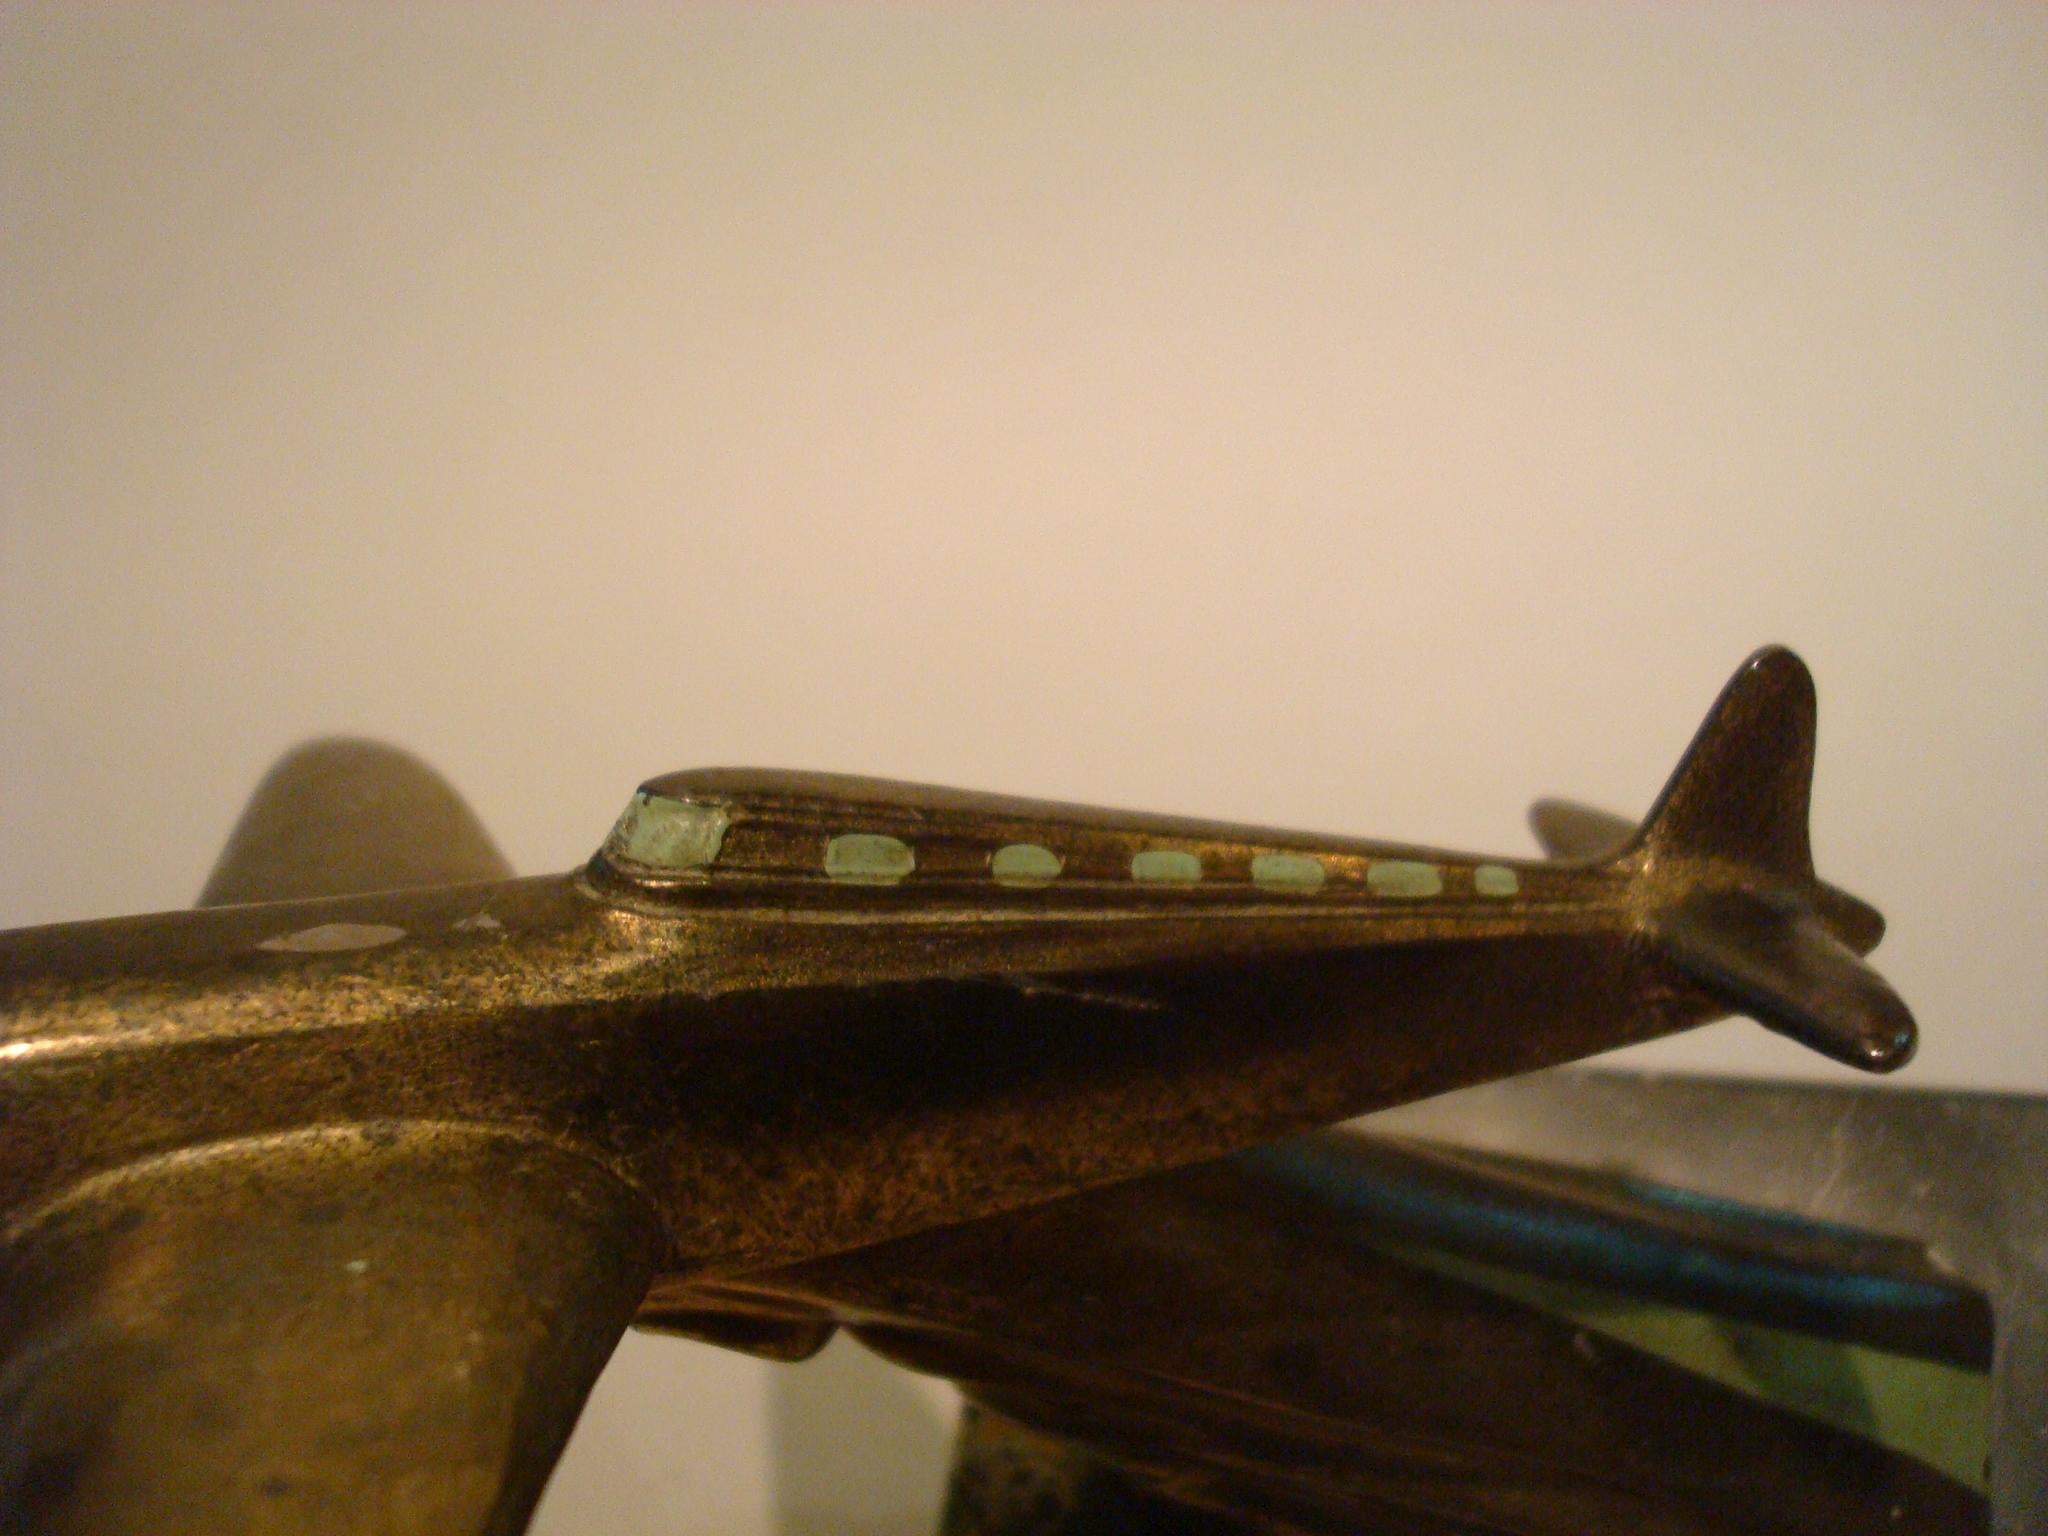 20th Century Art Deco French Airplane Desk Paperweight Sculpture